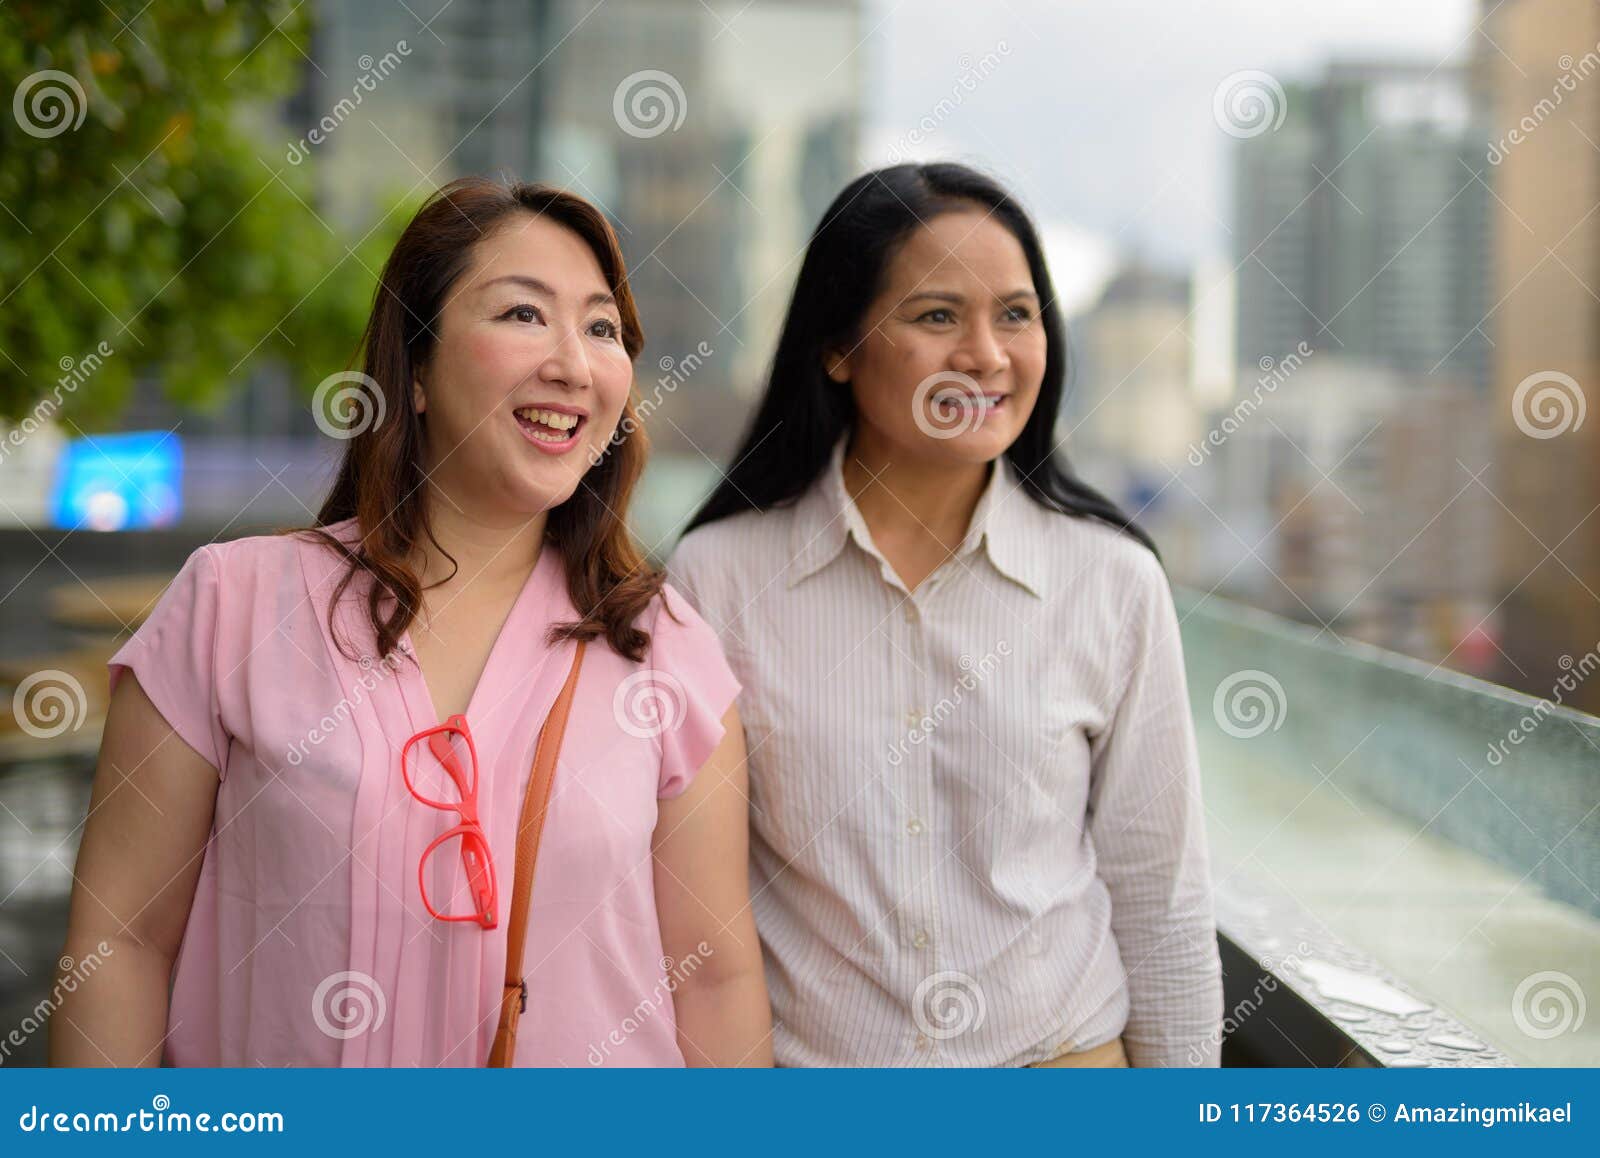 two mature asian women together against view city portrait two mature asian women together against view city 117364526